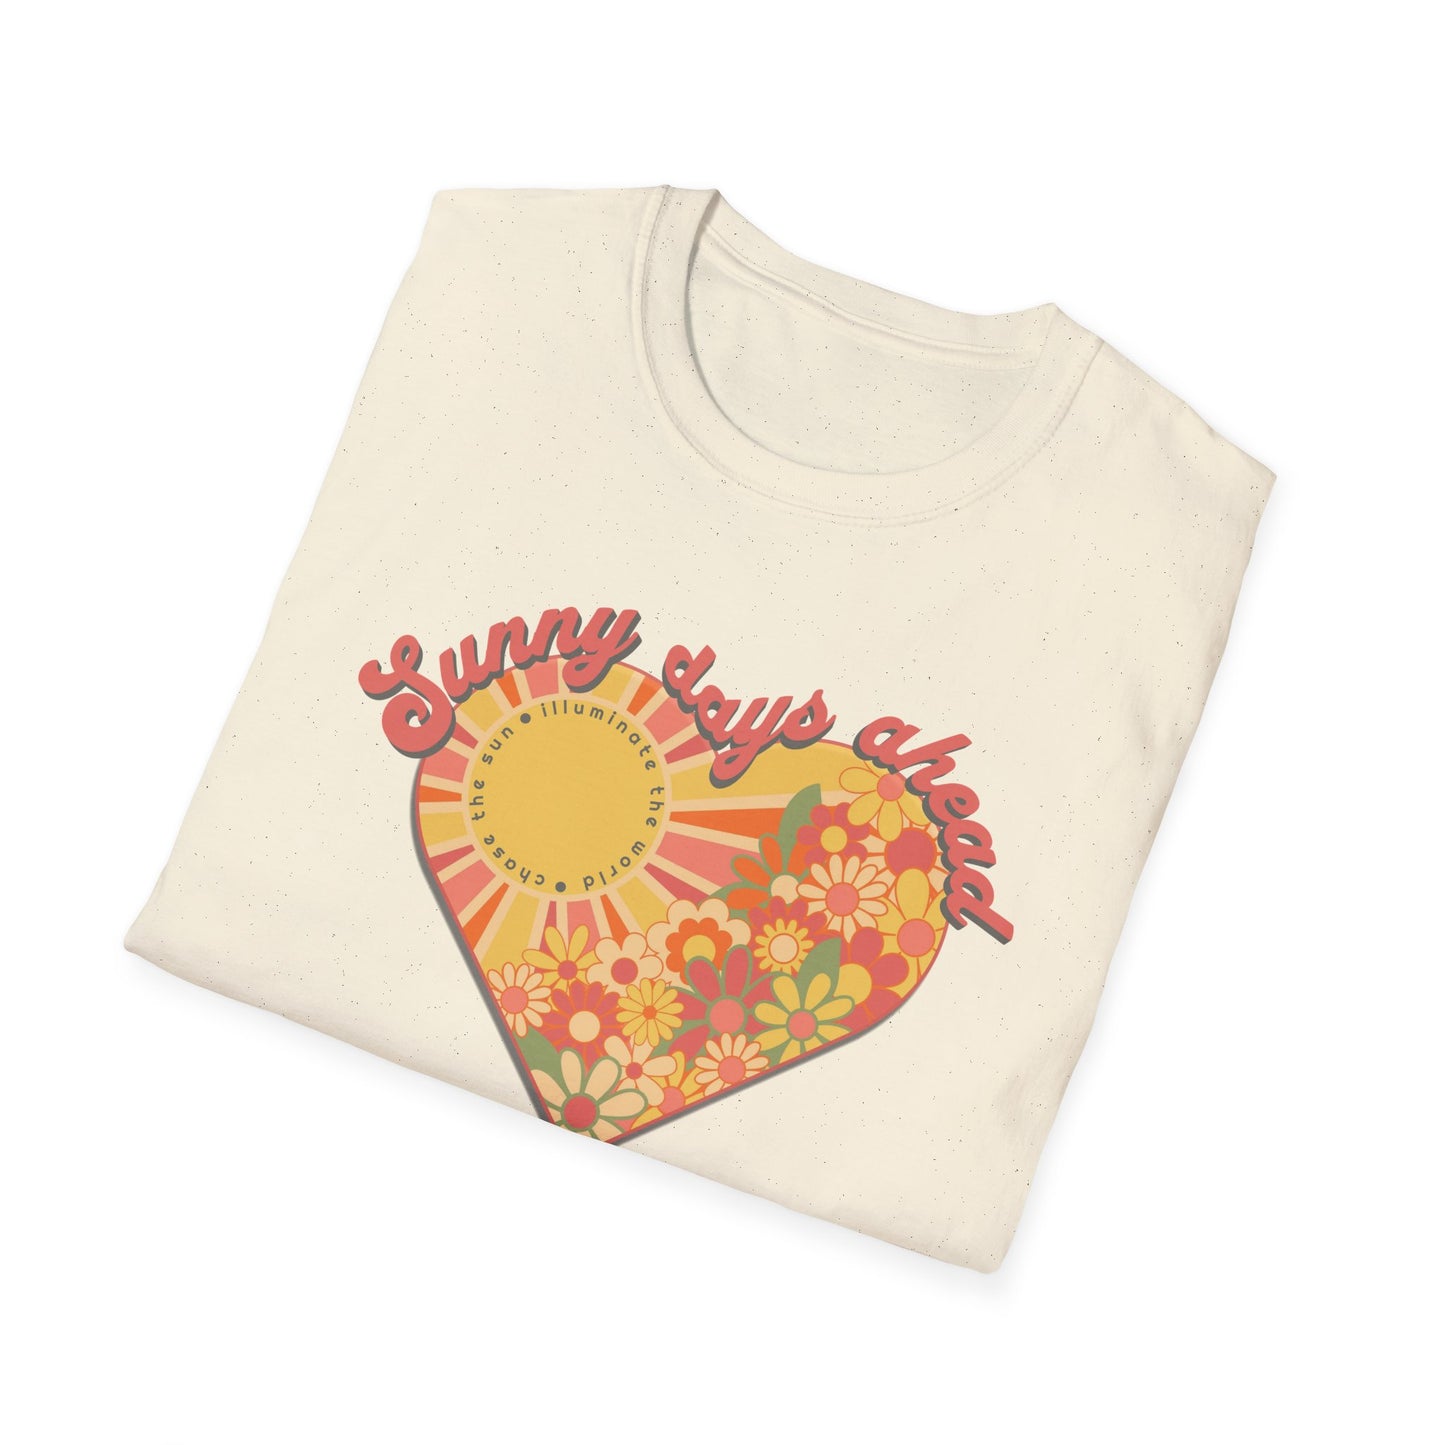 Retro Sunshine Floral Heart Tee, Sunny Days Ahead Vintage-Inspired Positive Affirmation, Retro Aesthetic, 70s Vibe, Plus Size, Unisex Softstyle T-Shirt